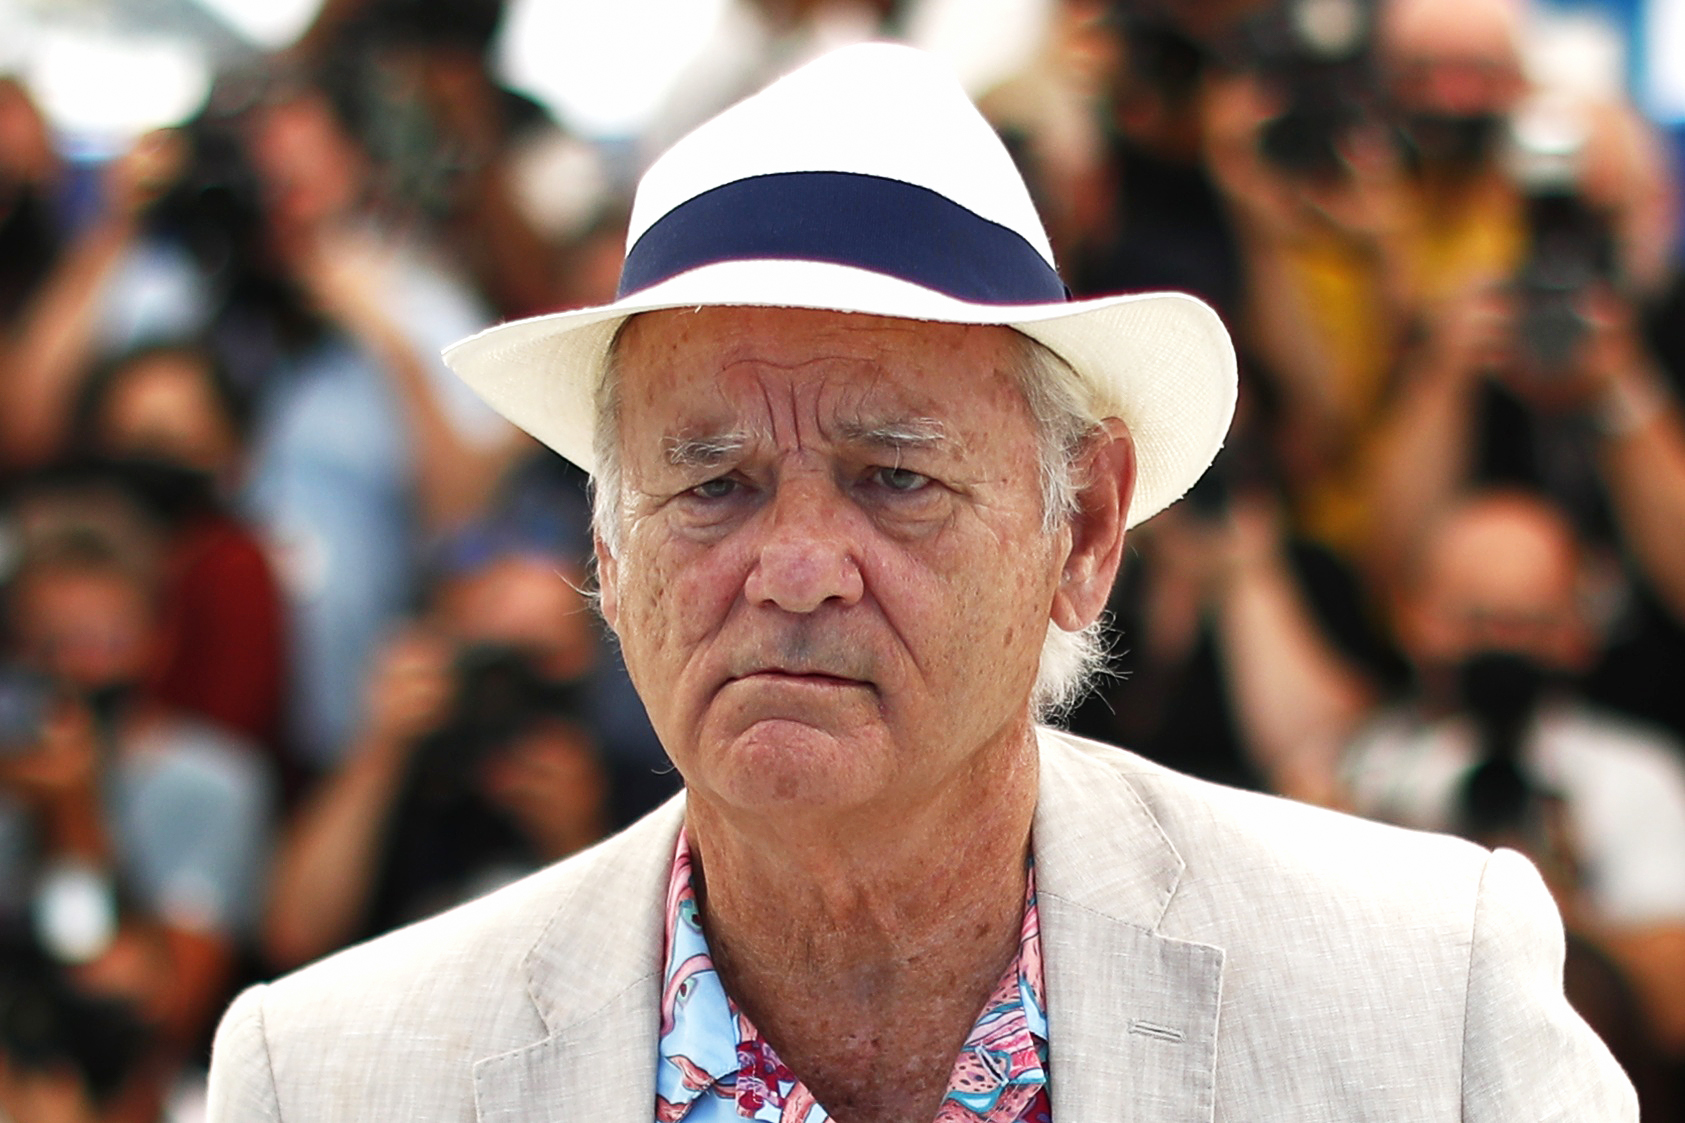 Bill Murray spoke about the accusation of inappropriate behavior: "I did something that I thought was funny and it was not interpreted that way" (Reuters)